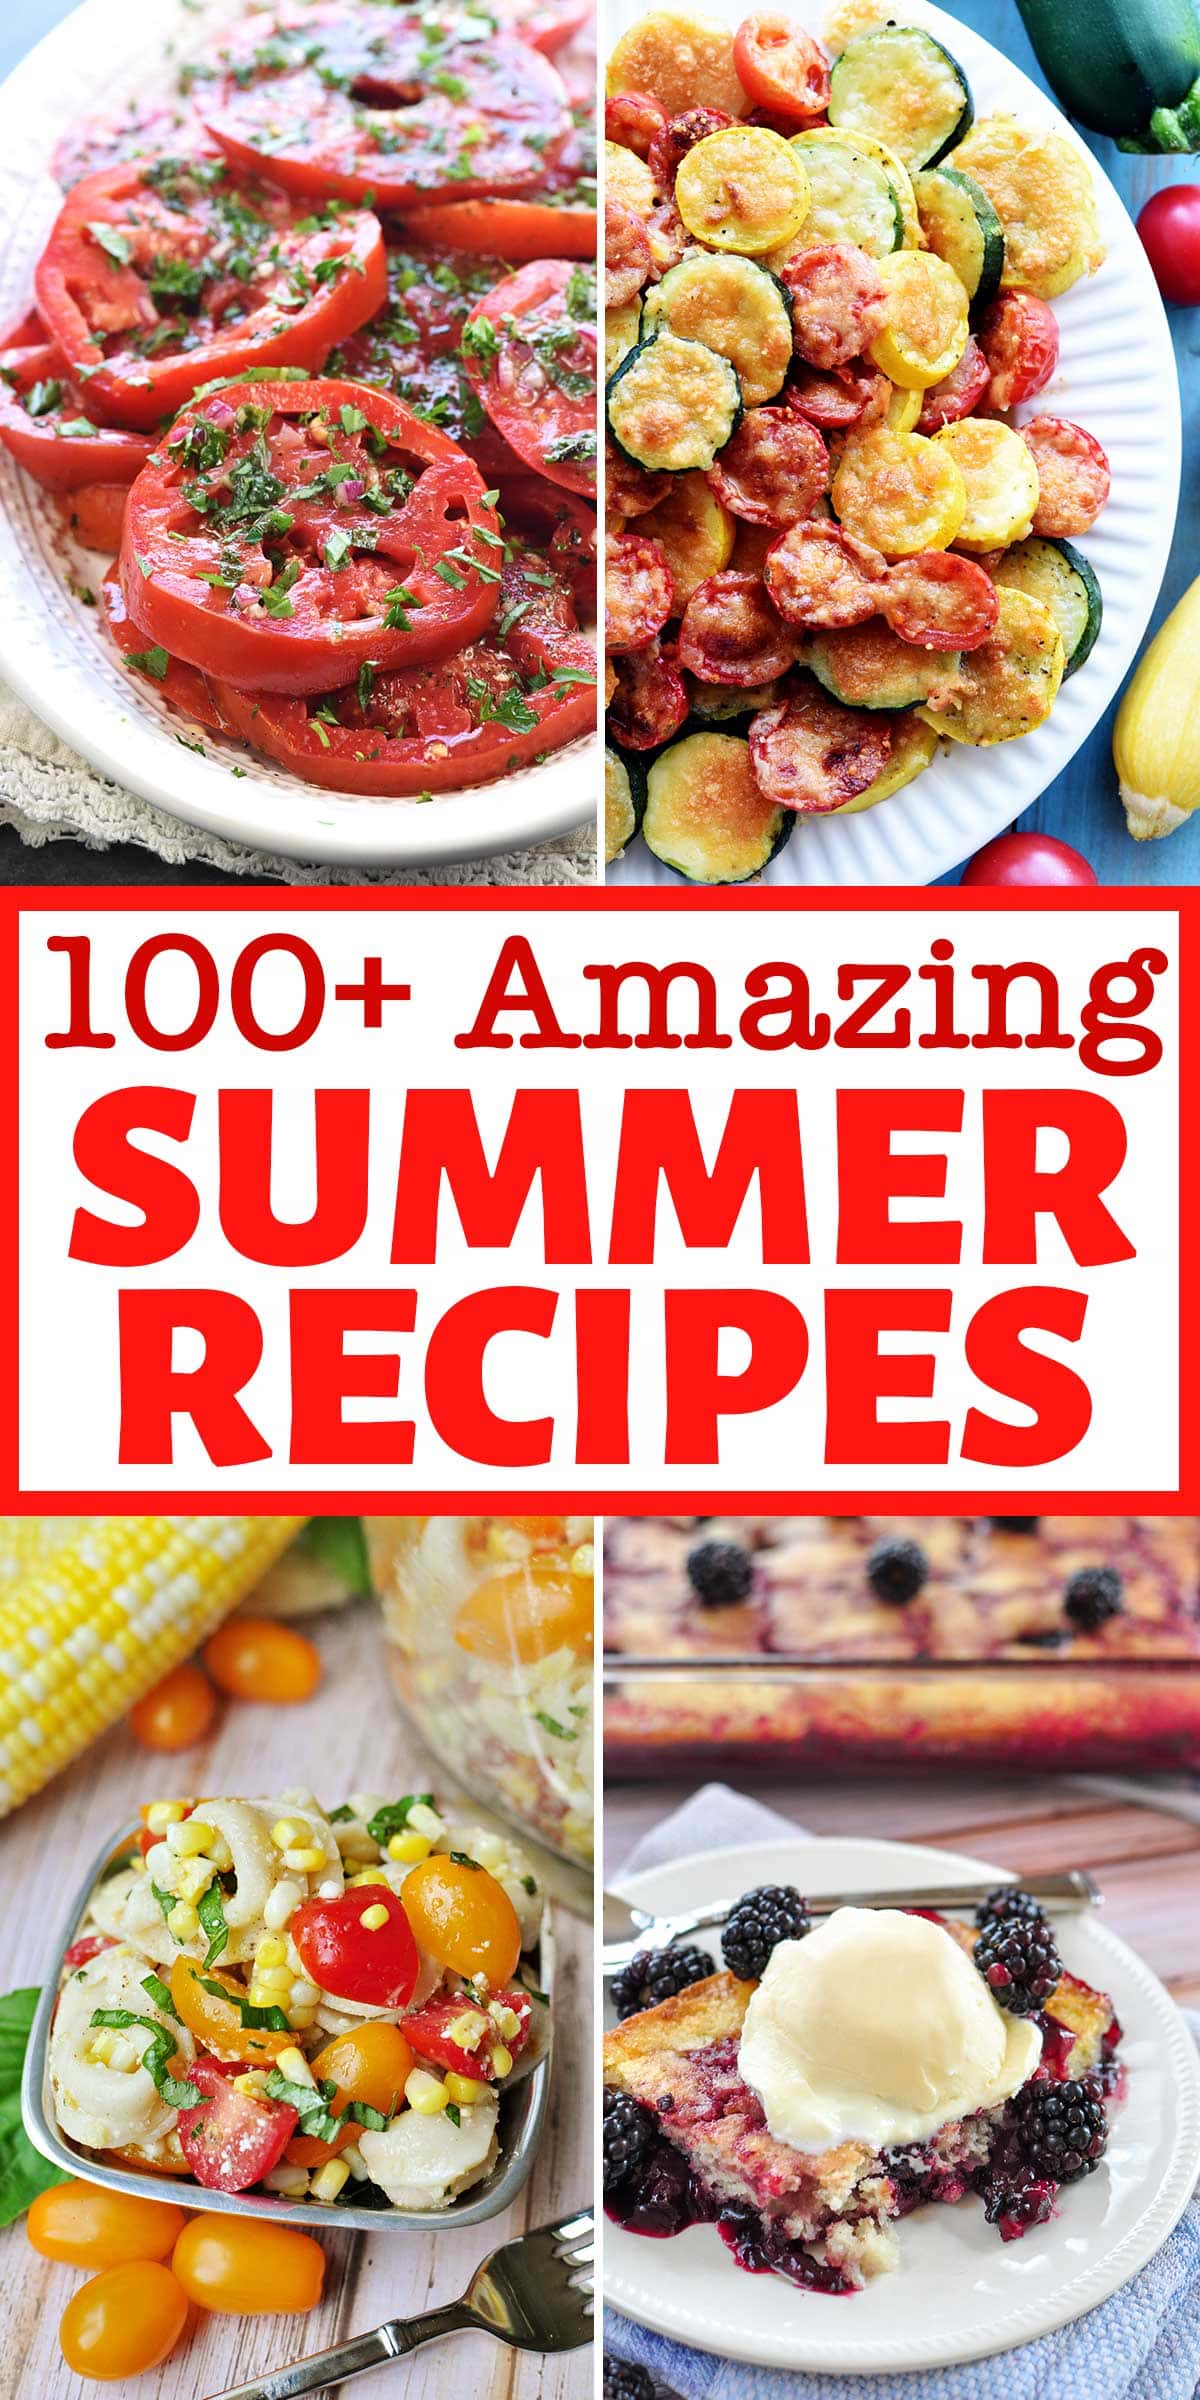 100+ AMAZING Summer Recipes ~ this scrumptious collection of seasonal recipes showcases fresh summer produce and warm weather favorites, ranging from lighter fare to grilling grub, pasta salads to summer salad recipes, refreshing drinks to fruity desserts, and so much more! These fabulous summer recipes are fresh, simple, made from scratch, and incredibly delicious. | FiveHeartHome.com via @fivehearthome